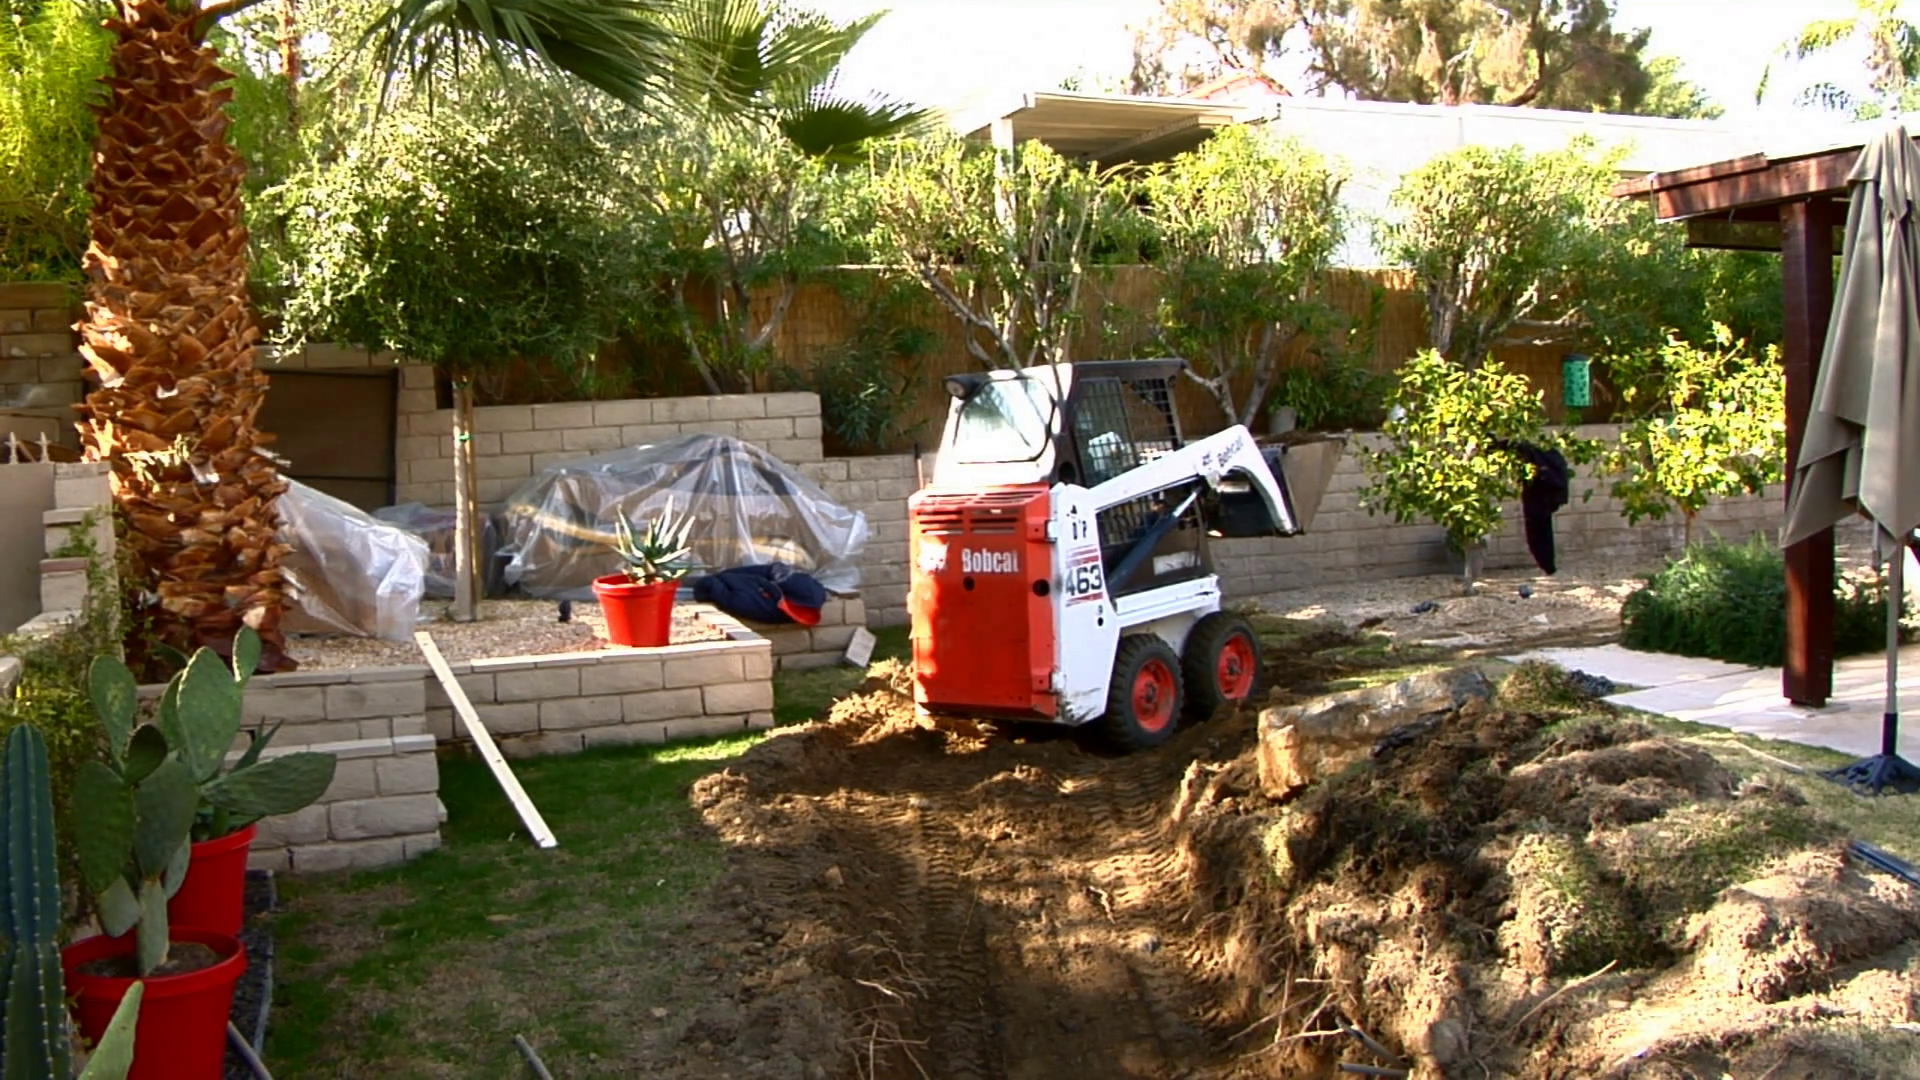 bobcat-drives-away-from-construction-site_sstuolr0_thumbnail-full07.png